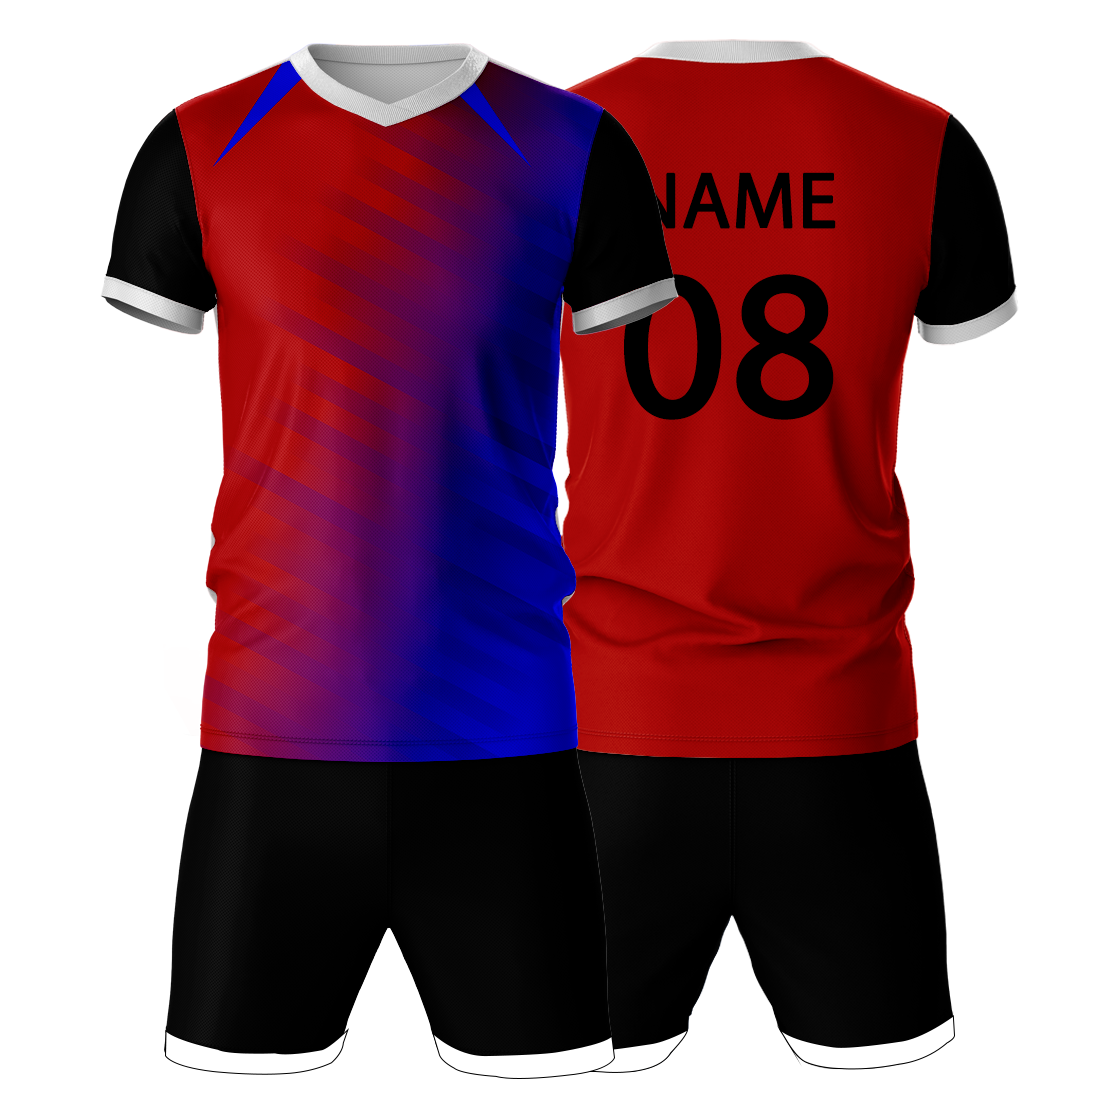 All Over Printed Jersey With Shorts Name & Number Printed.NP50000688